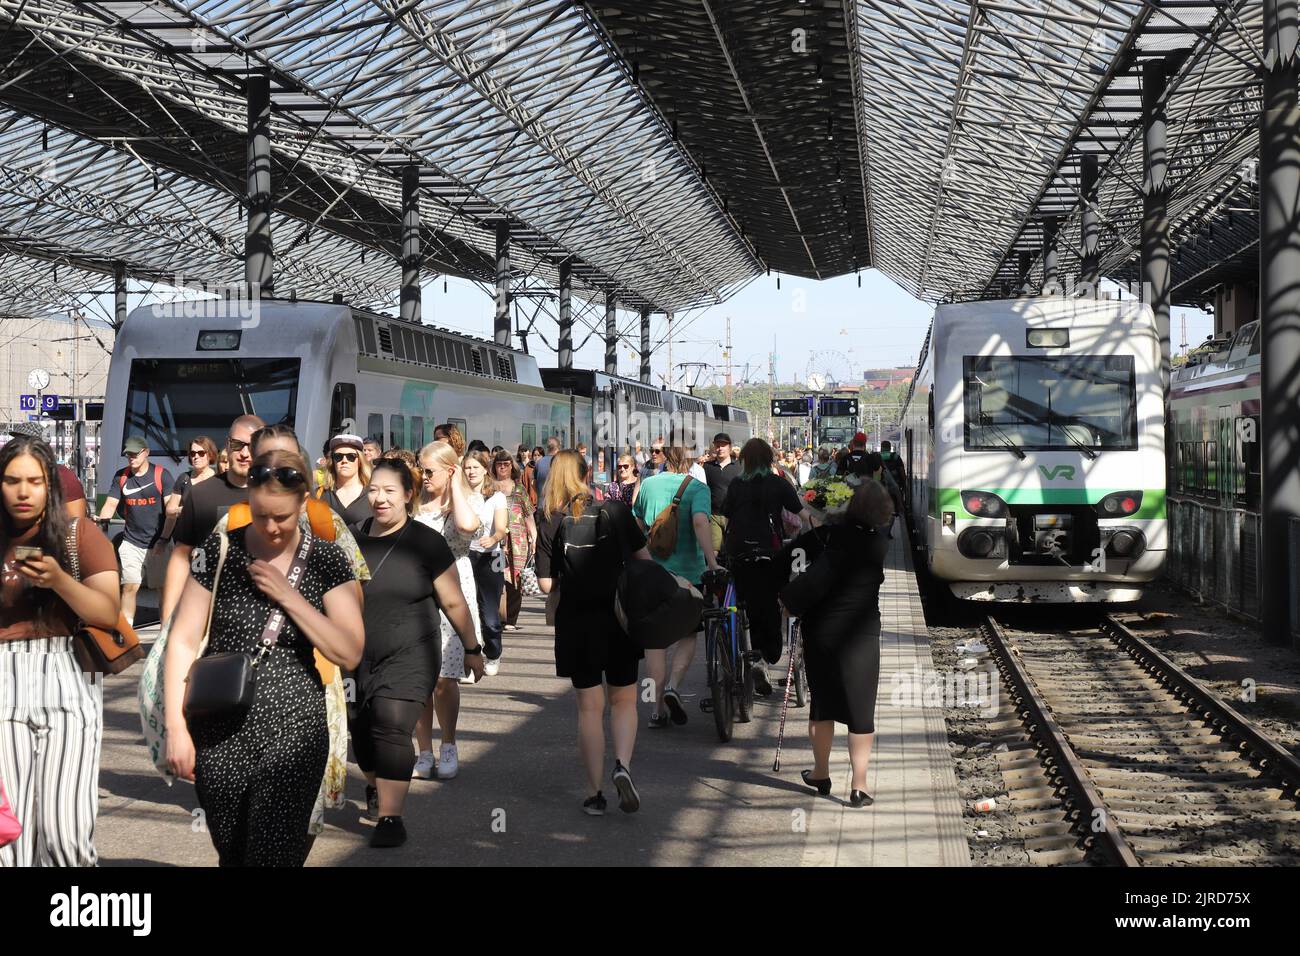 Helsinki, Finland - August 20, 2022: Arriving passengers at the Helsinki Central railroad station. Stock Photo